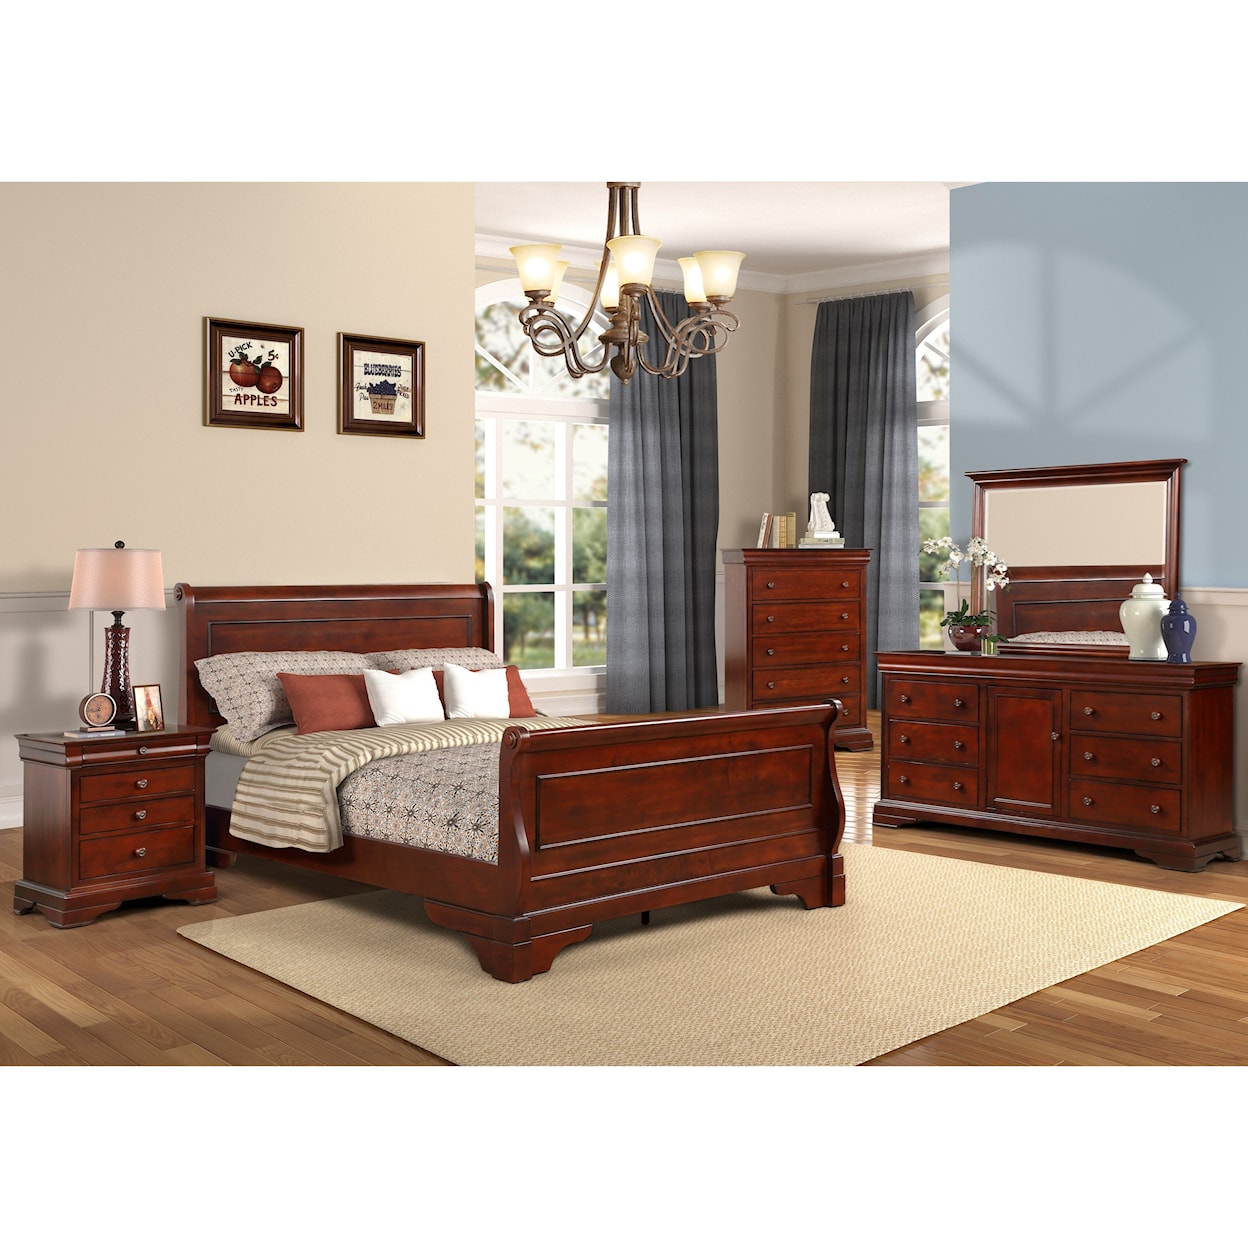 New Classic Versaille Twin Bedroom Group